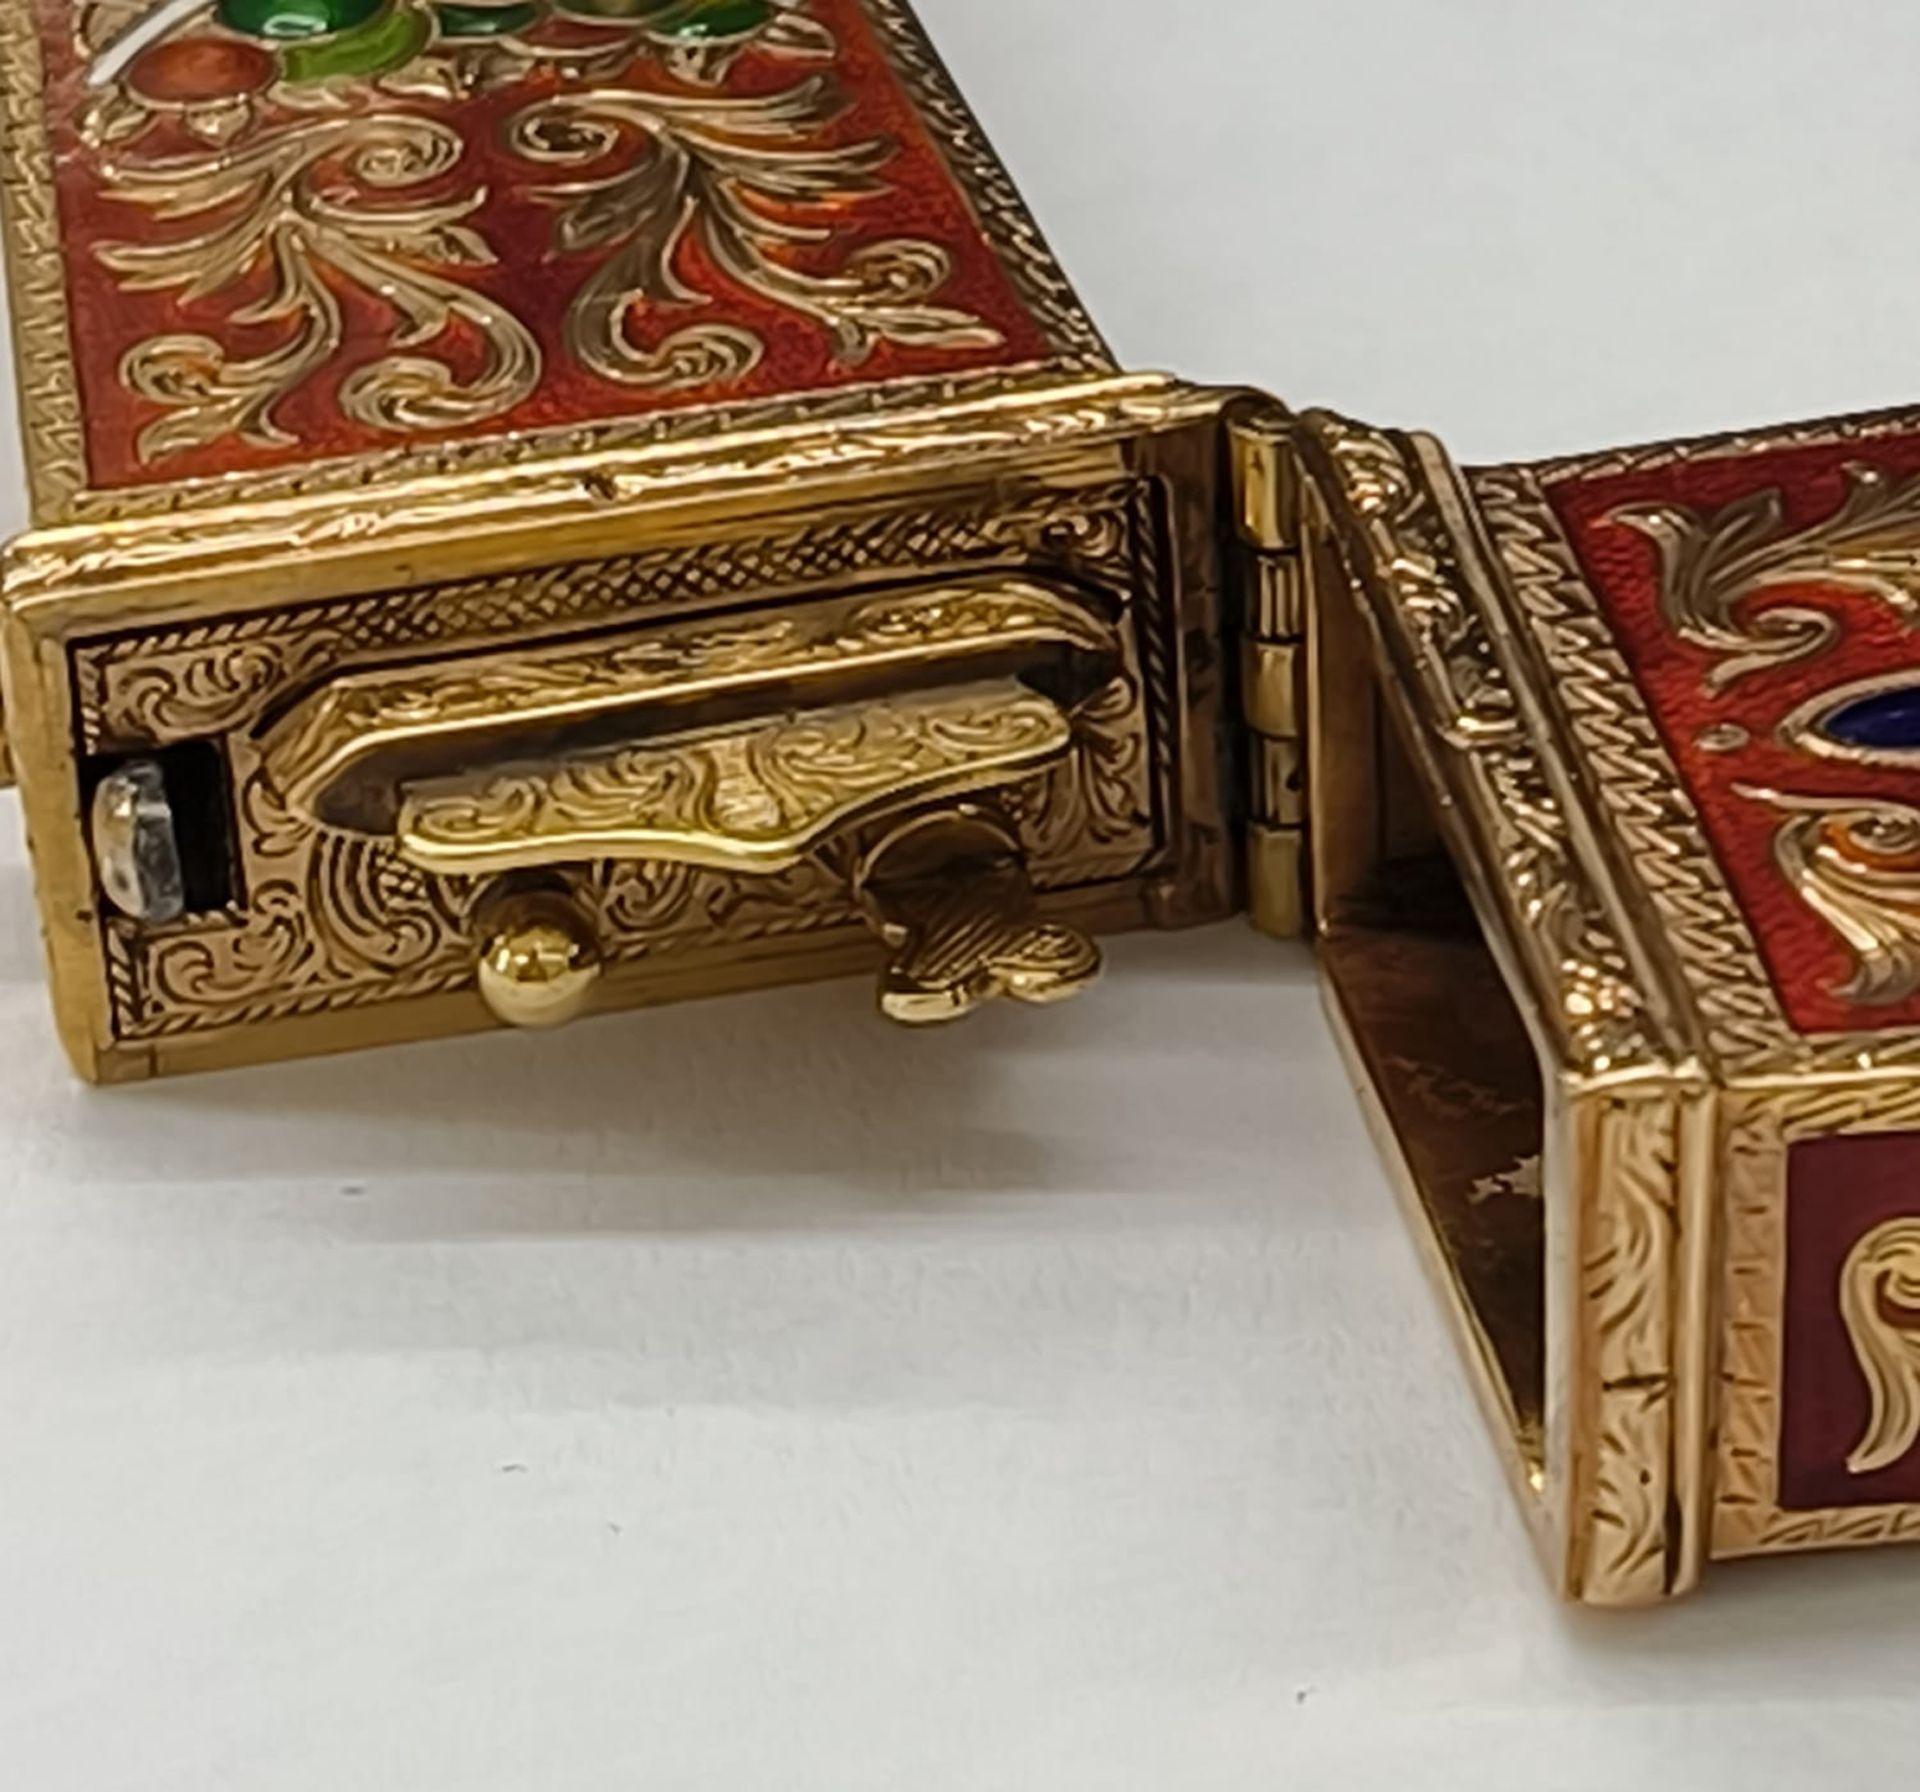 Etui in sterling gold and enamel set with rubies and old-cut diamond, Russian work from the early 20 - Image 7 of 8